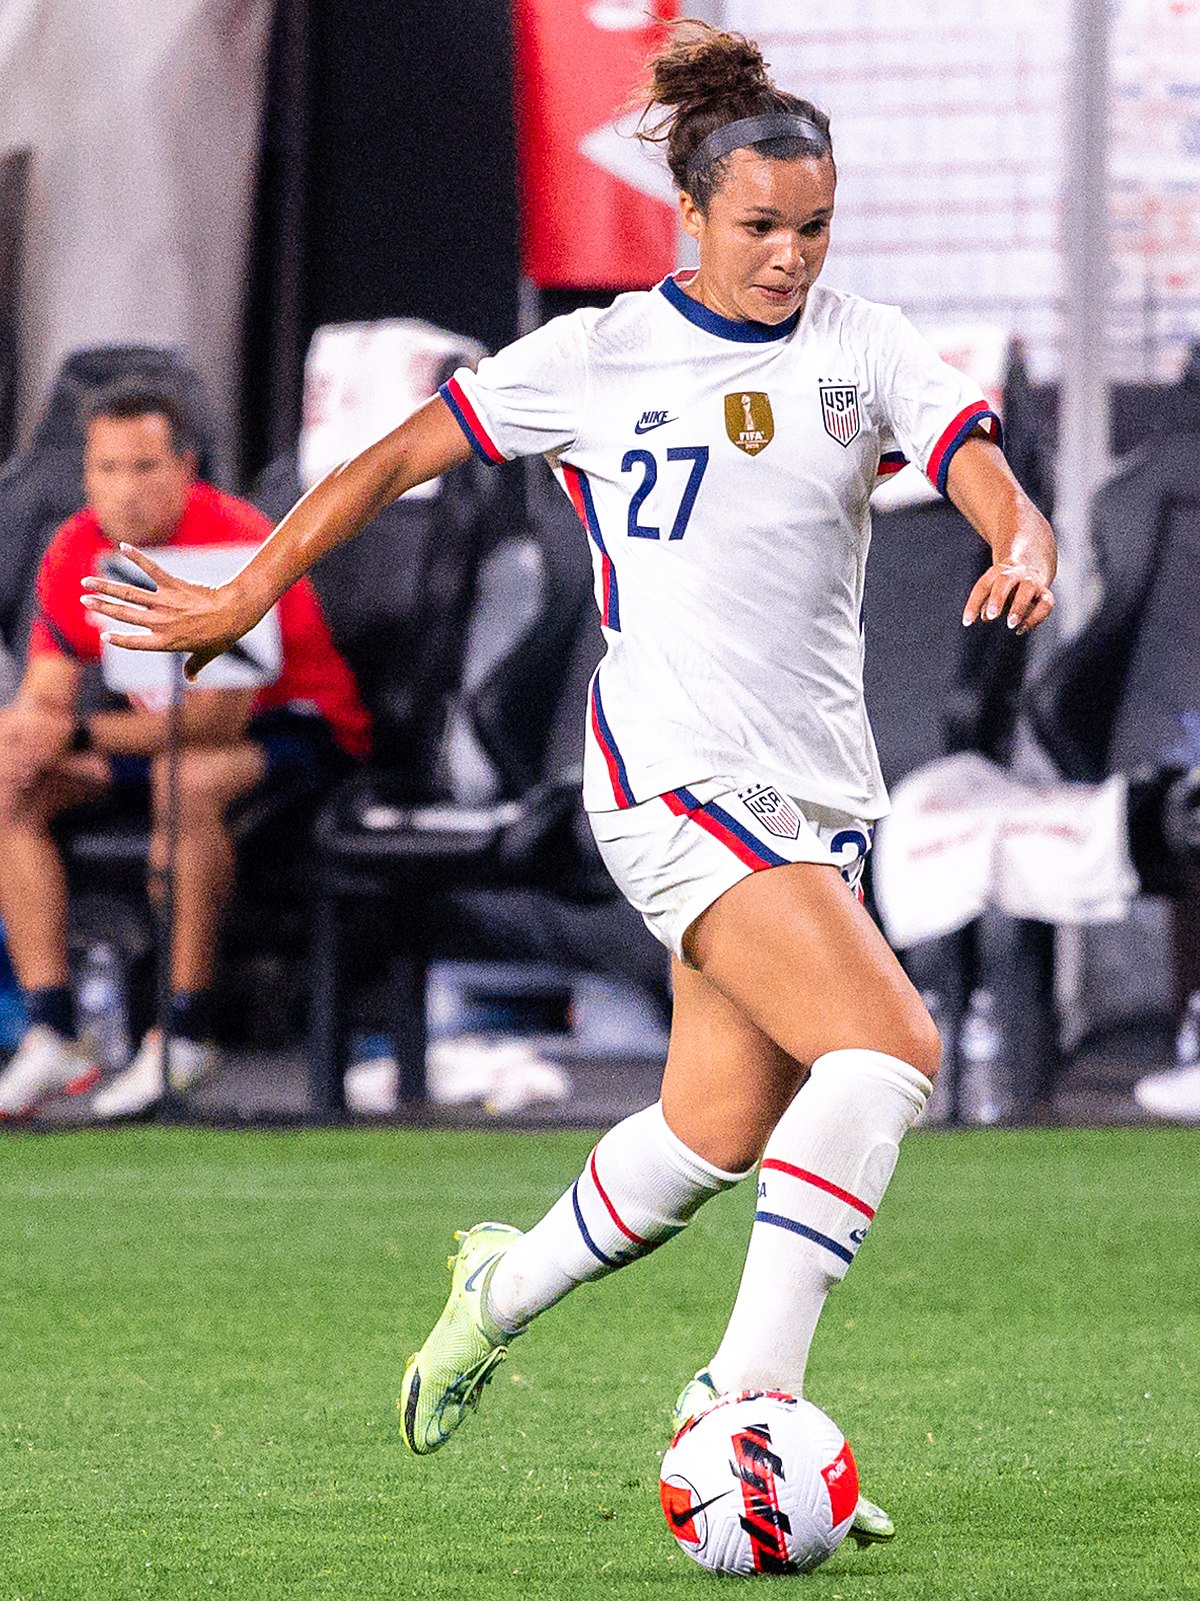 Windsor's Sophia Smith ready for World Cup star turn with USWNT